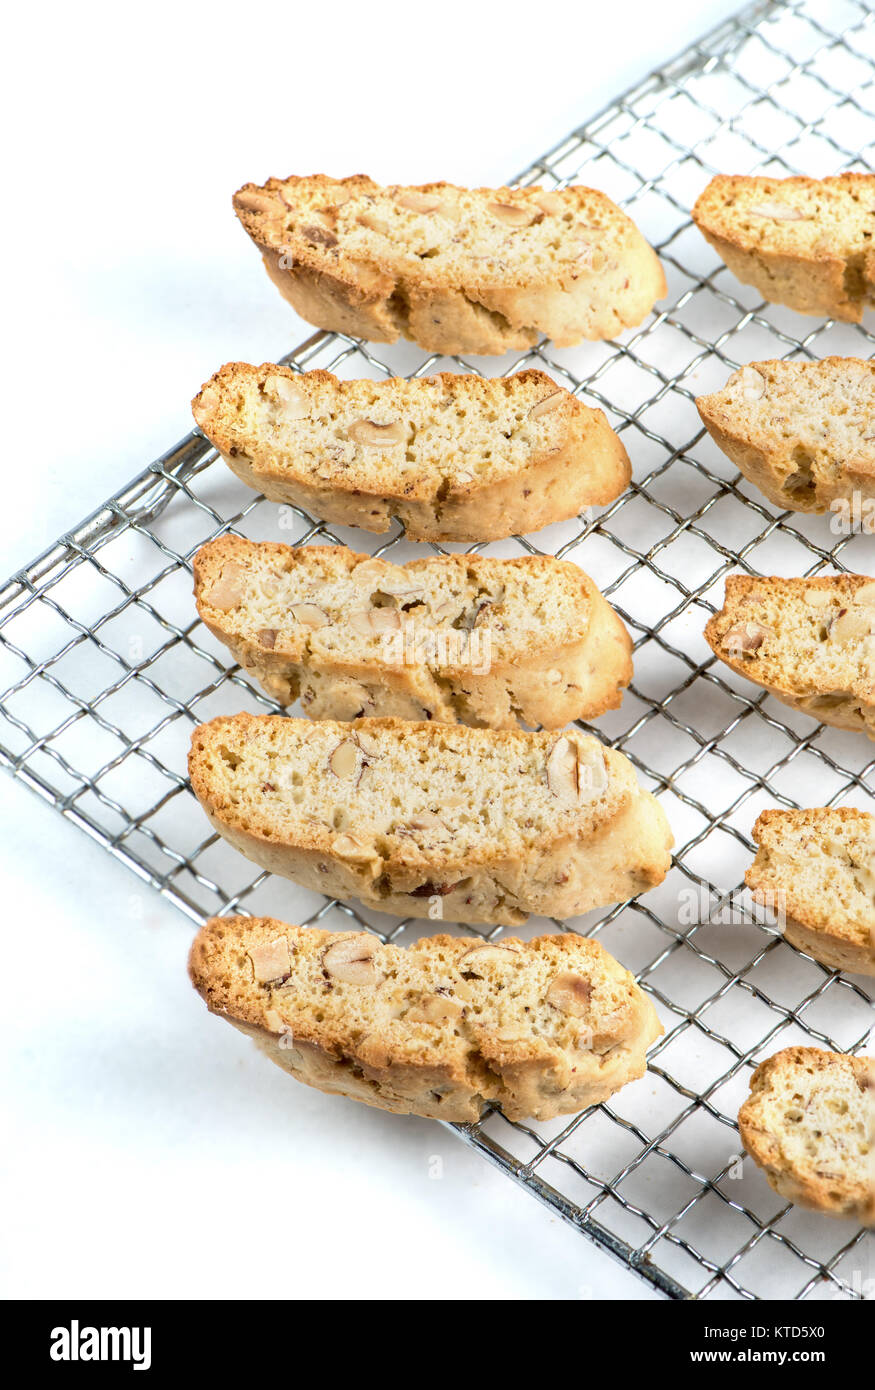 Traditional and tasty biscotti doublr baked on a rack and white background. Stock Photo